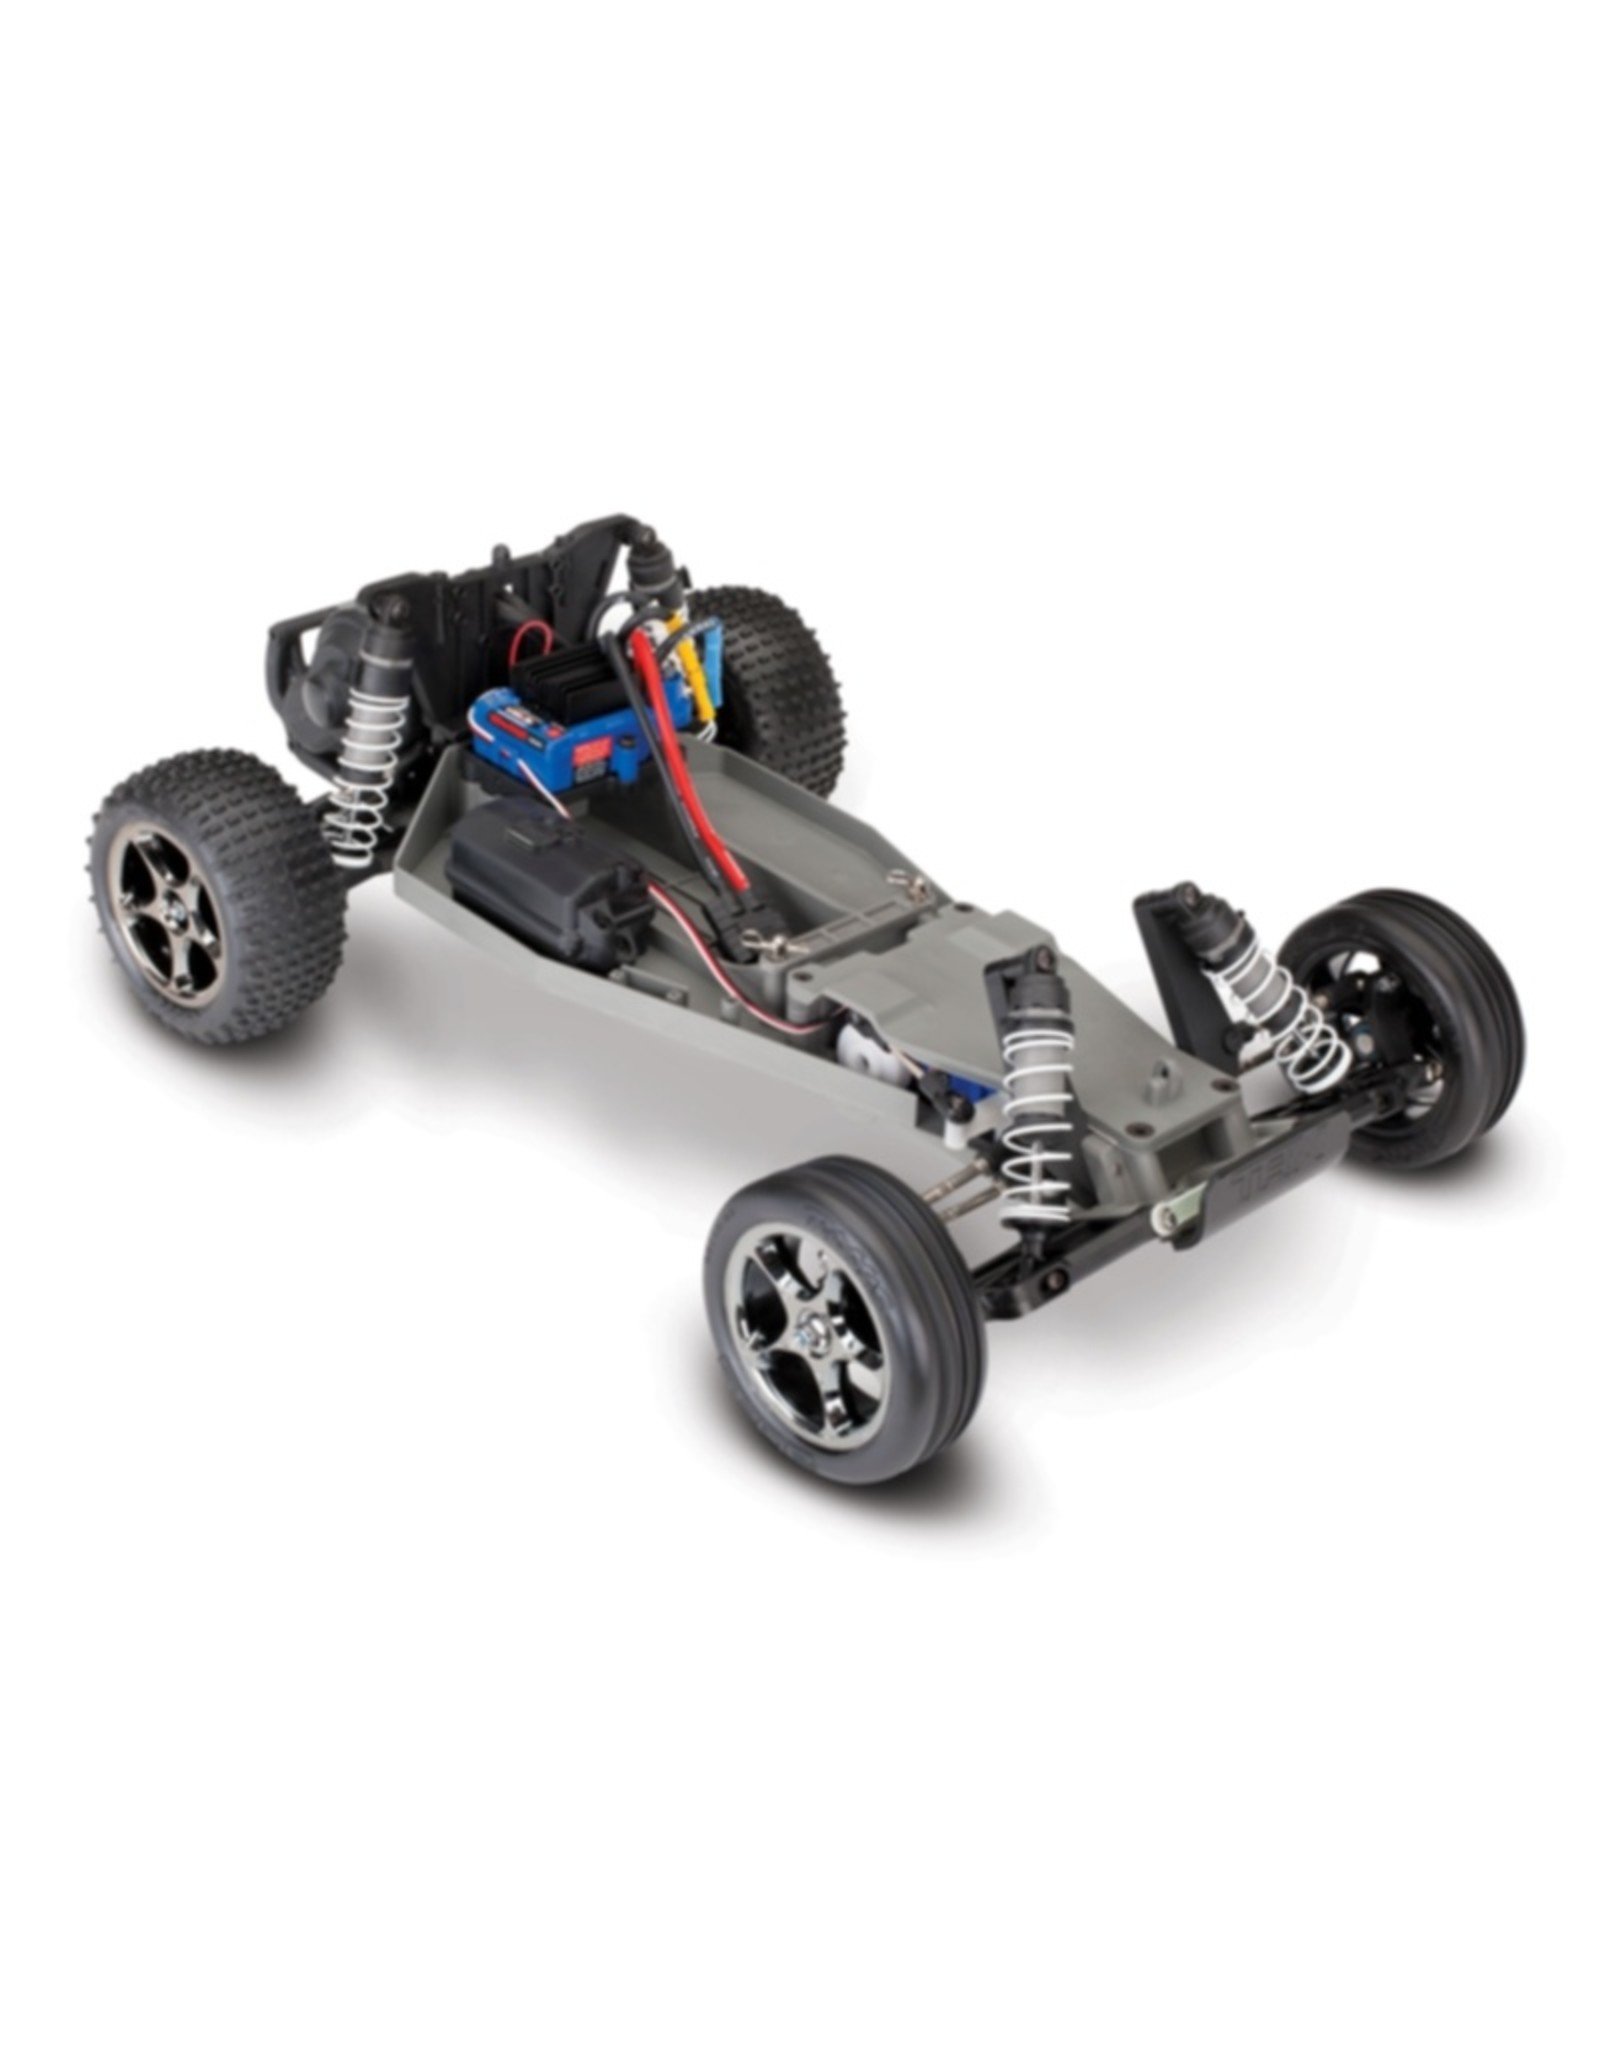 Traxxas TRA24076-4 Green Bandit VXL 1/10 Scale off road Buggy with Stability Management No Battery